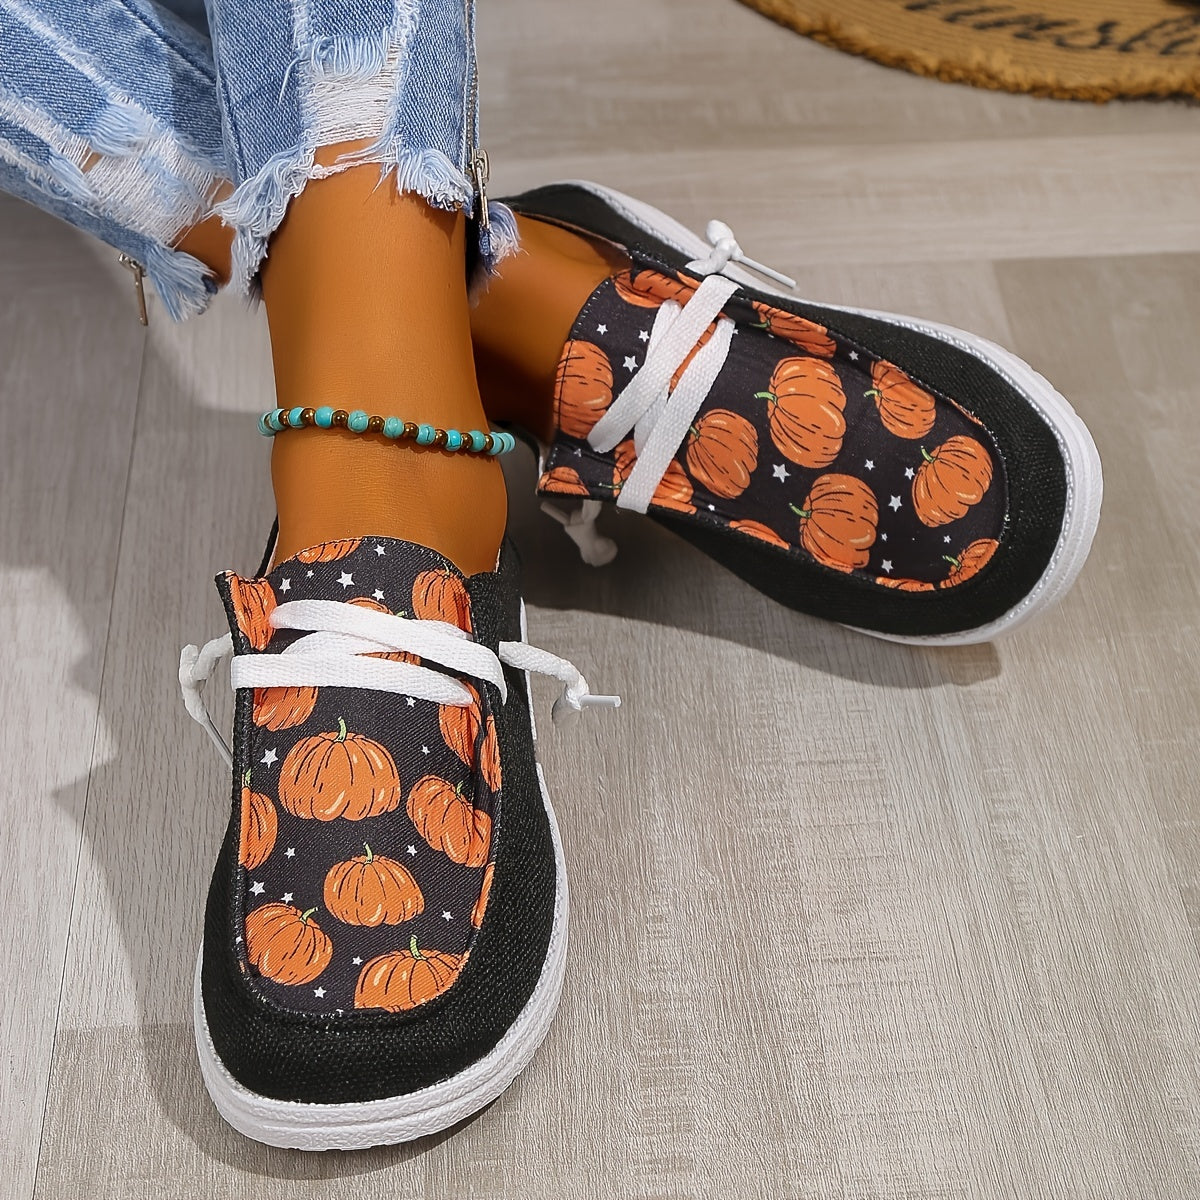 Pumpkin Print Canvas Shoes, Halloween Round Toe Loafers